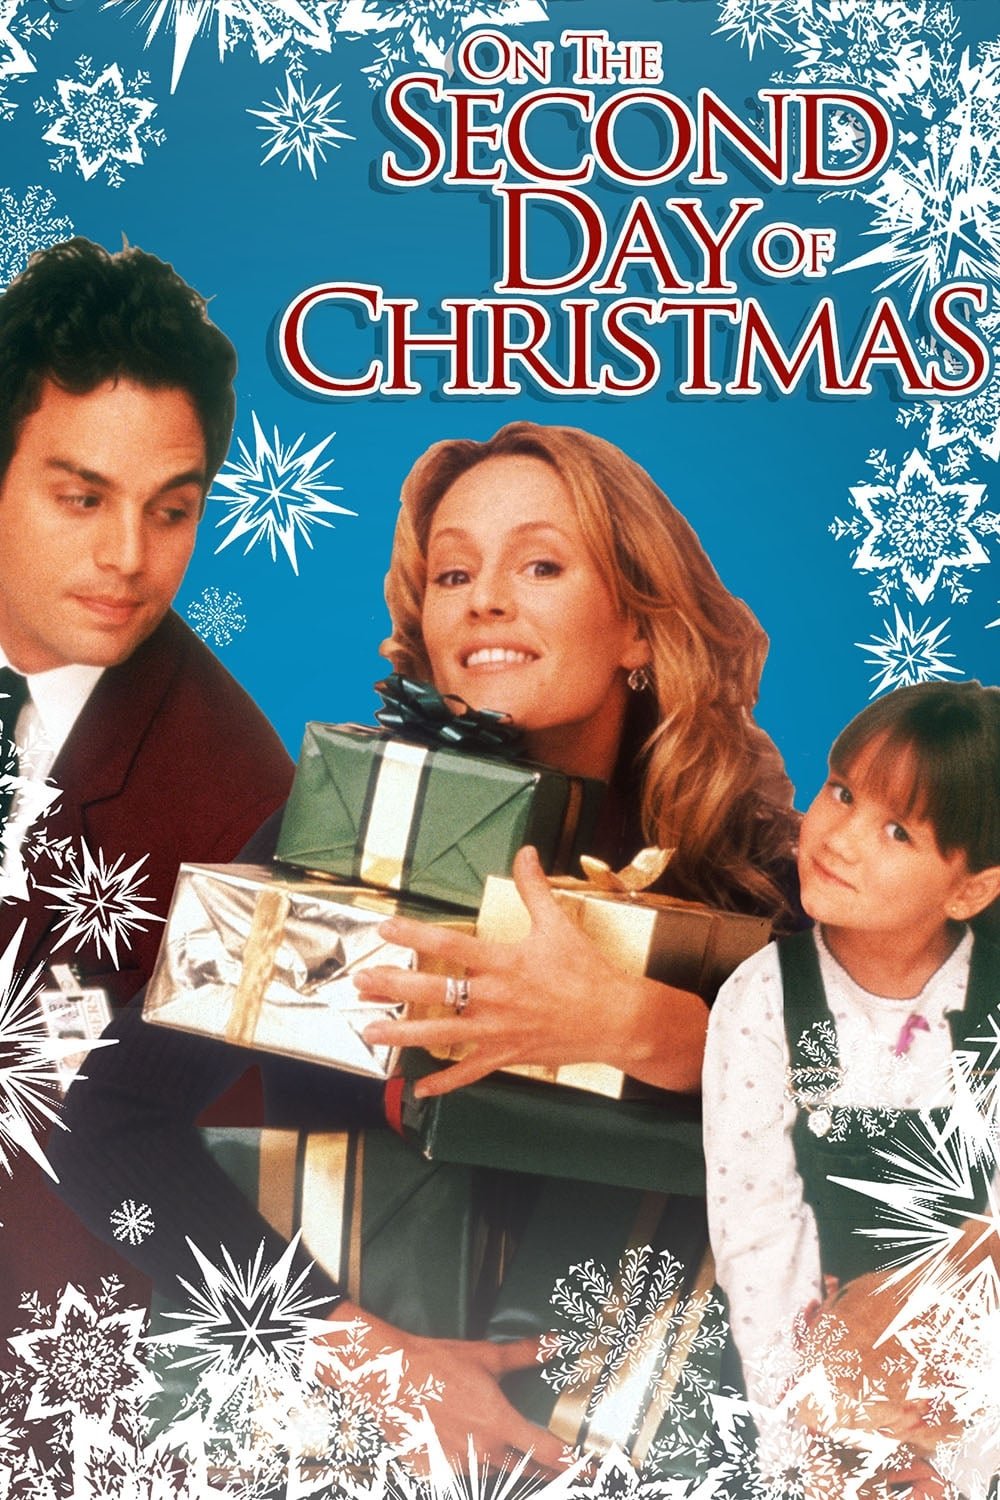 On the Second Day of Christmas (1997)